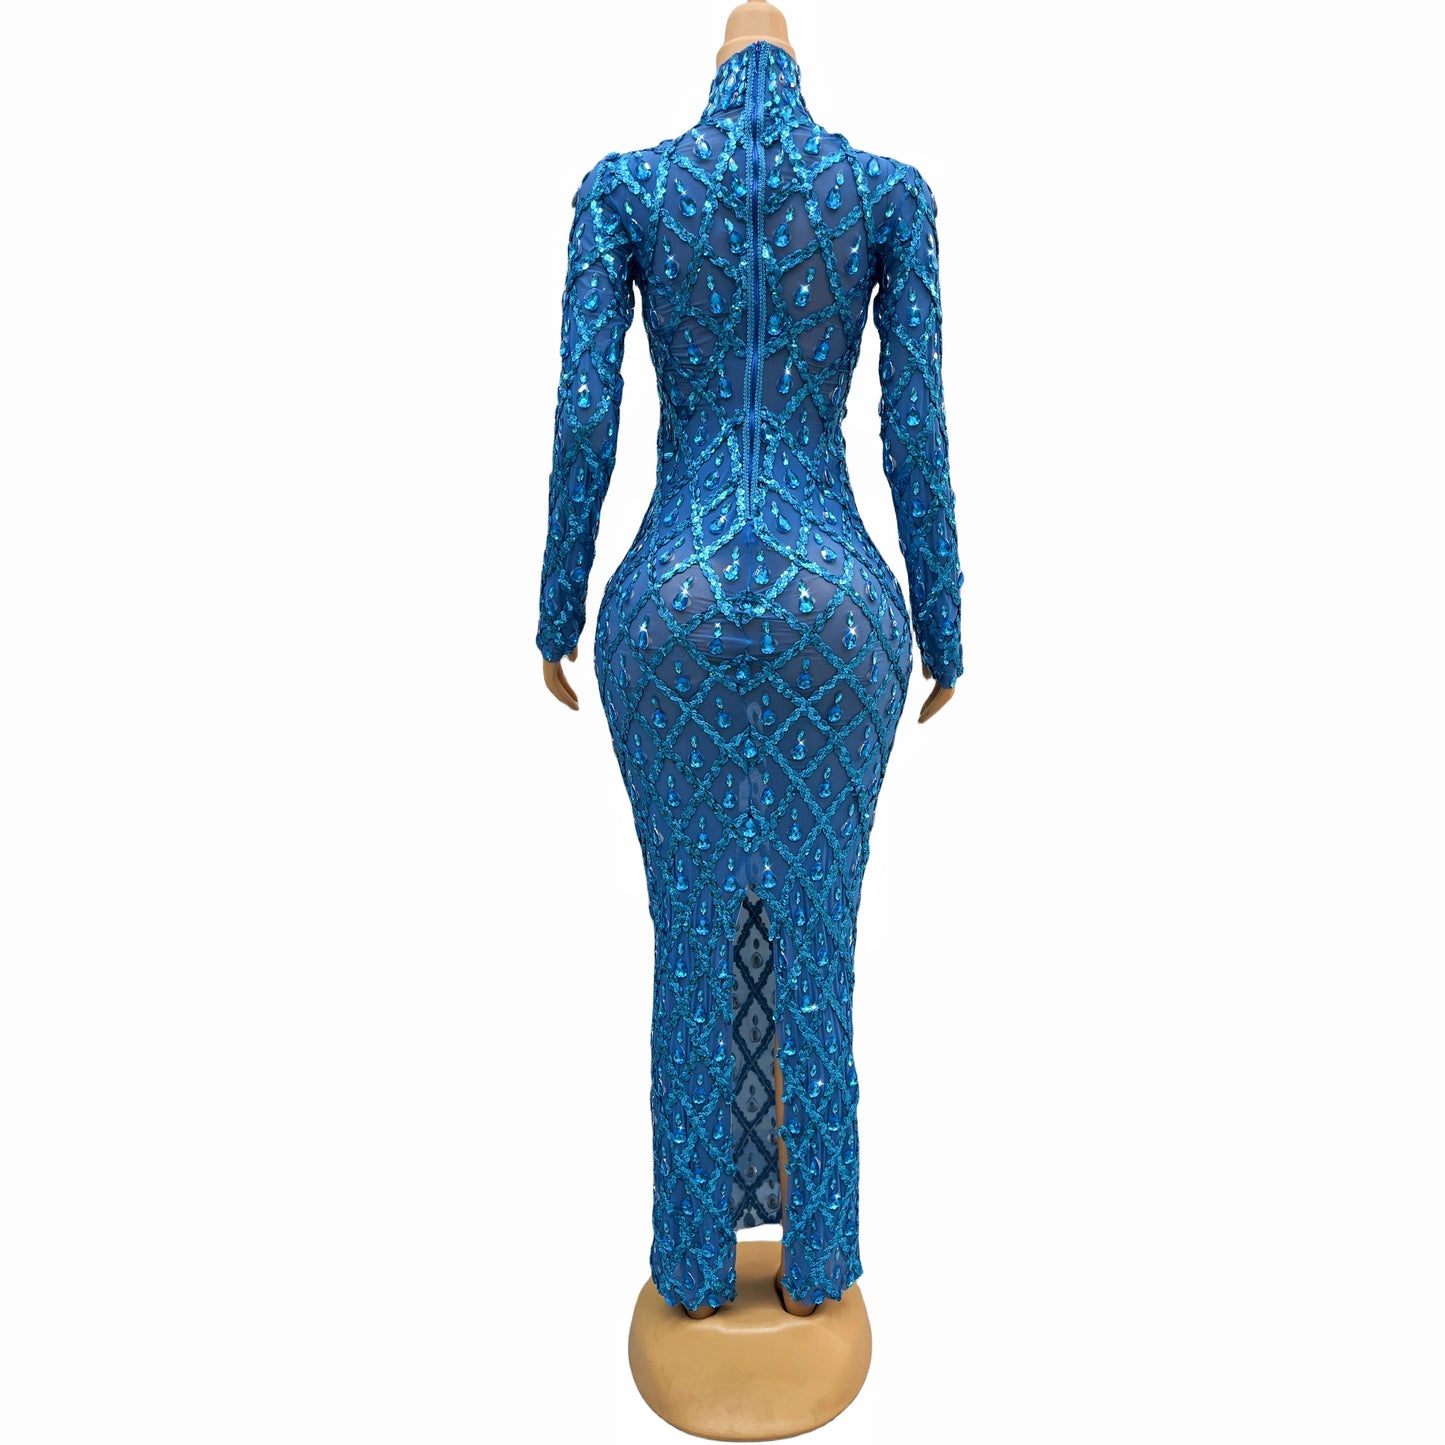 Product Title: Spill the Tea, Not the Sequins: Long Mesh Mermaid Majesty